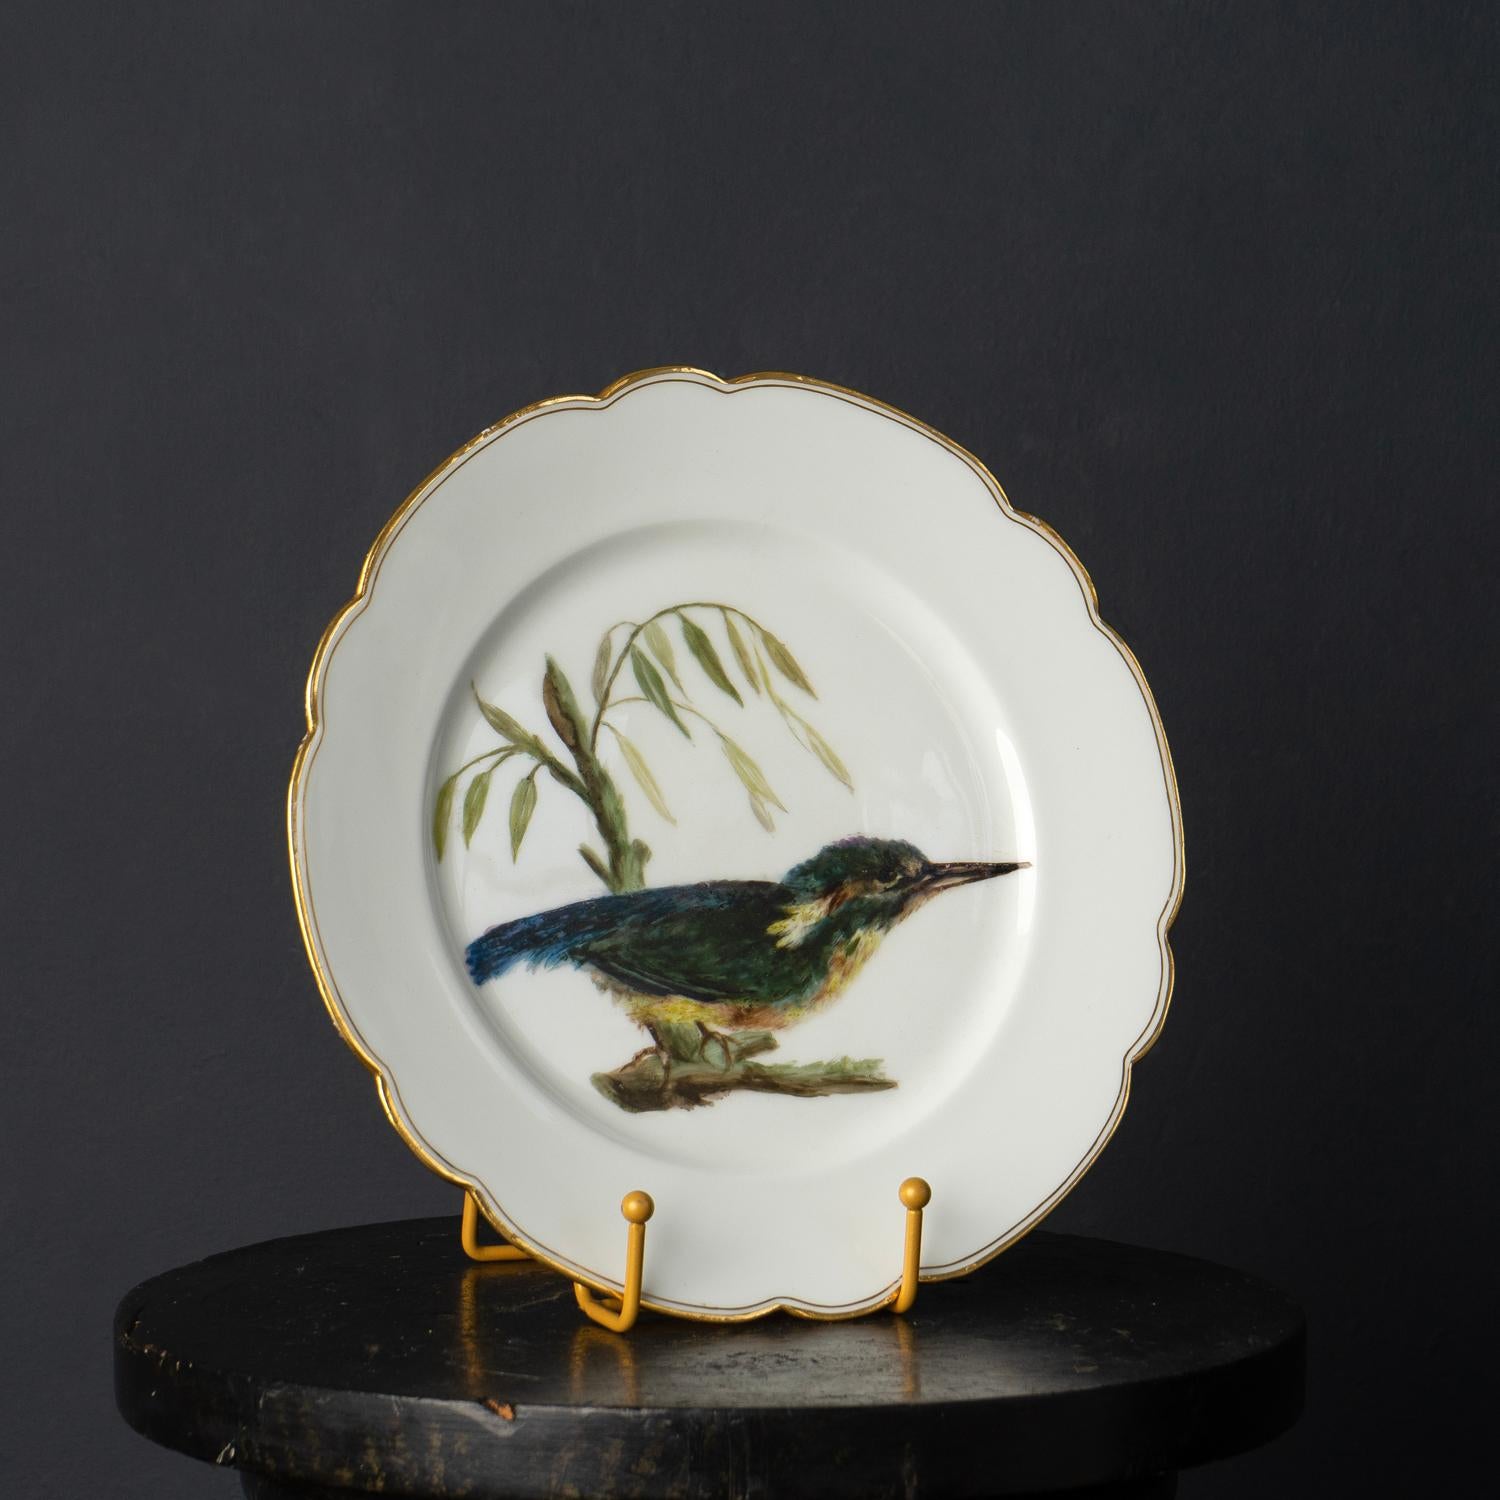 Antique French Hand-Painted Kingfisher Porcelain Plate, 19th Century For Sale 3